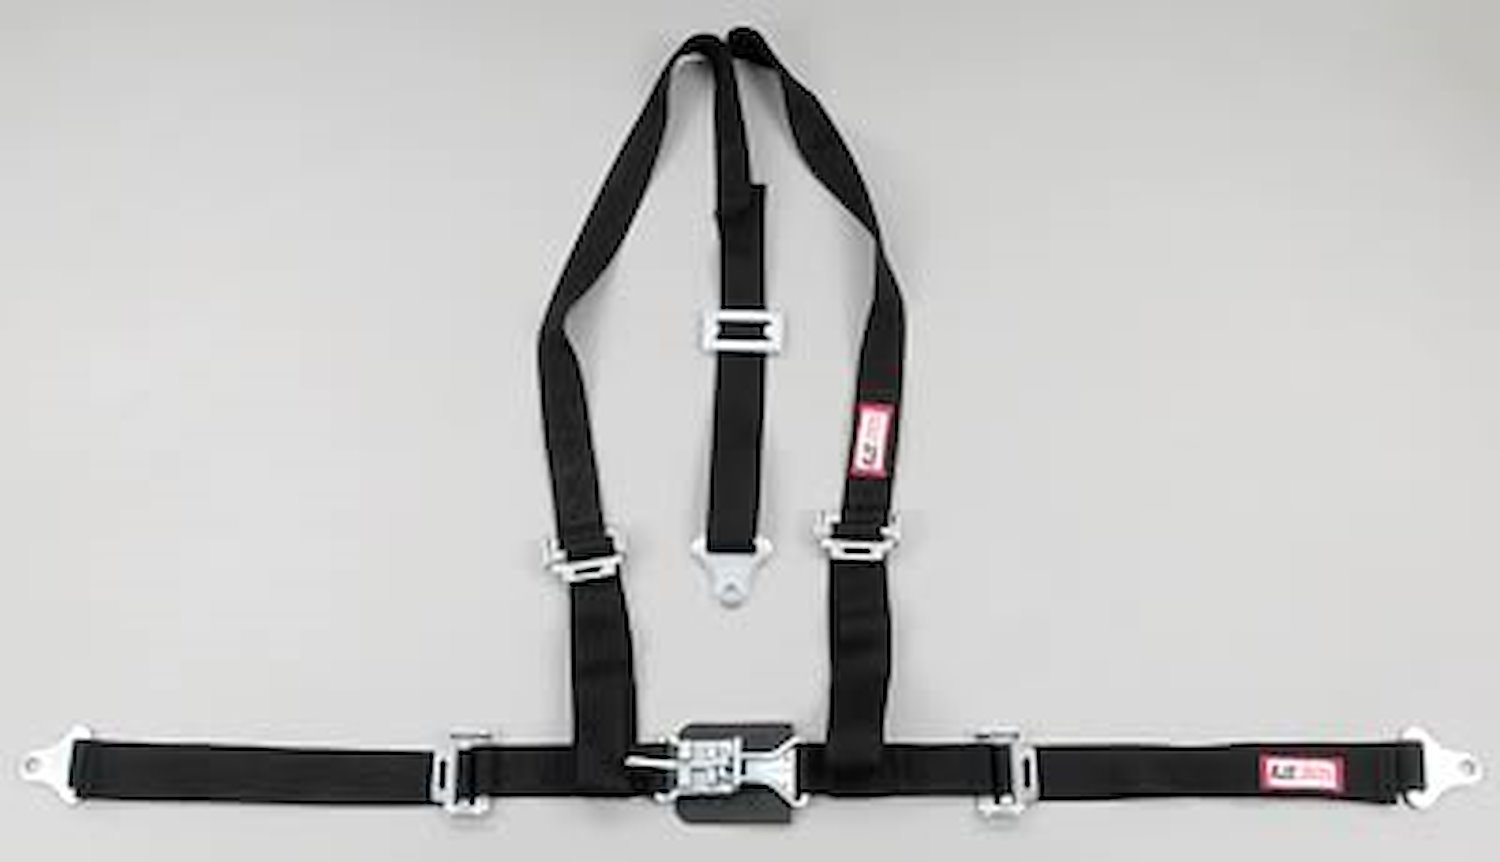 NON-SFI L&L HARNESS 2 PULL UP Lap Belt w/Adjuster 2 S.H. Y FLOOR MOUNT w/STERNUM STRAP ALL WRAP ENDS HOT PINK